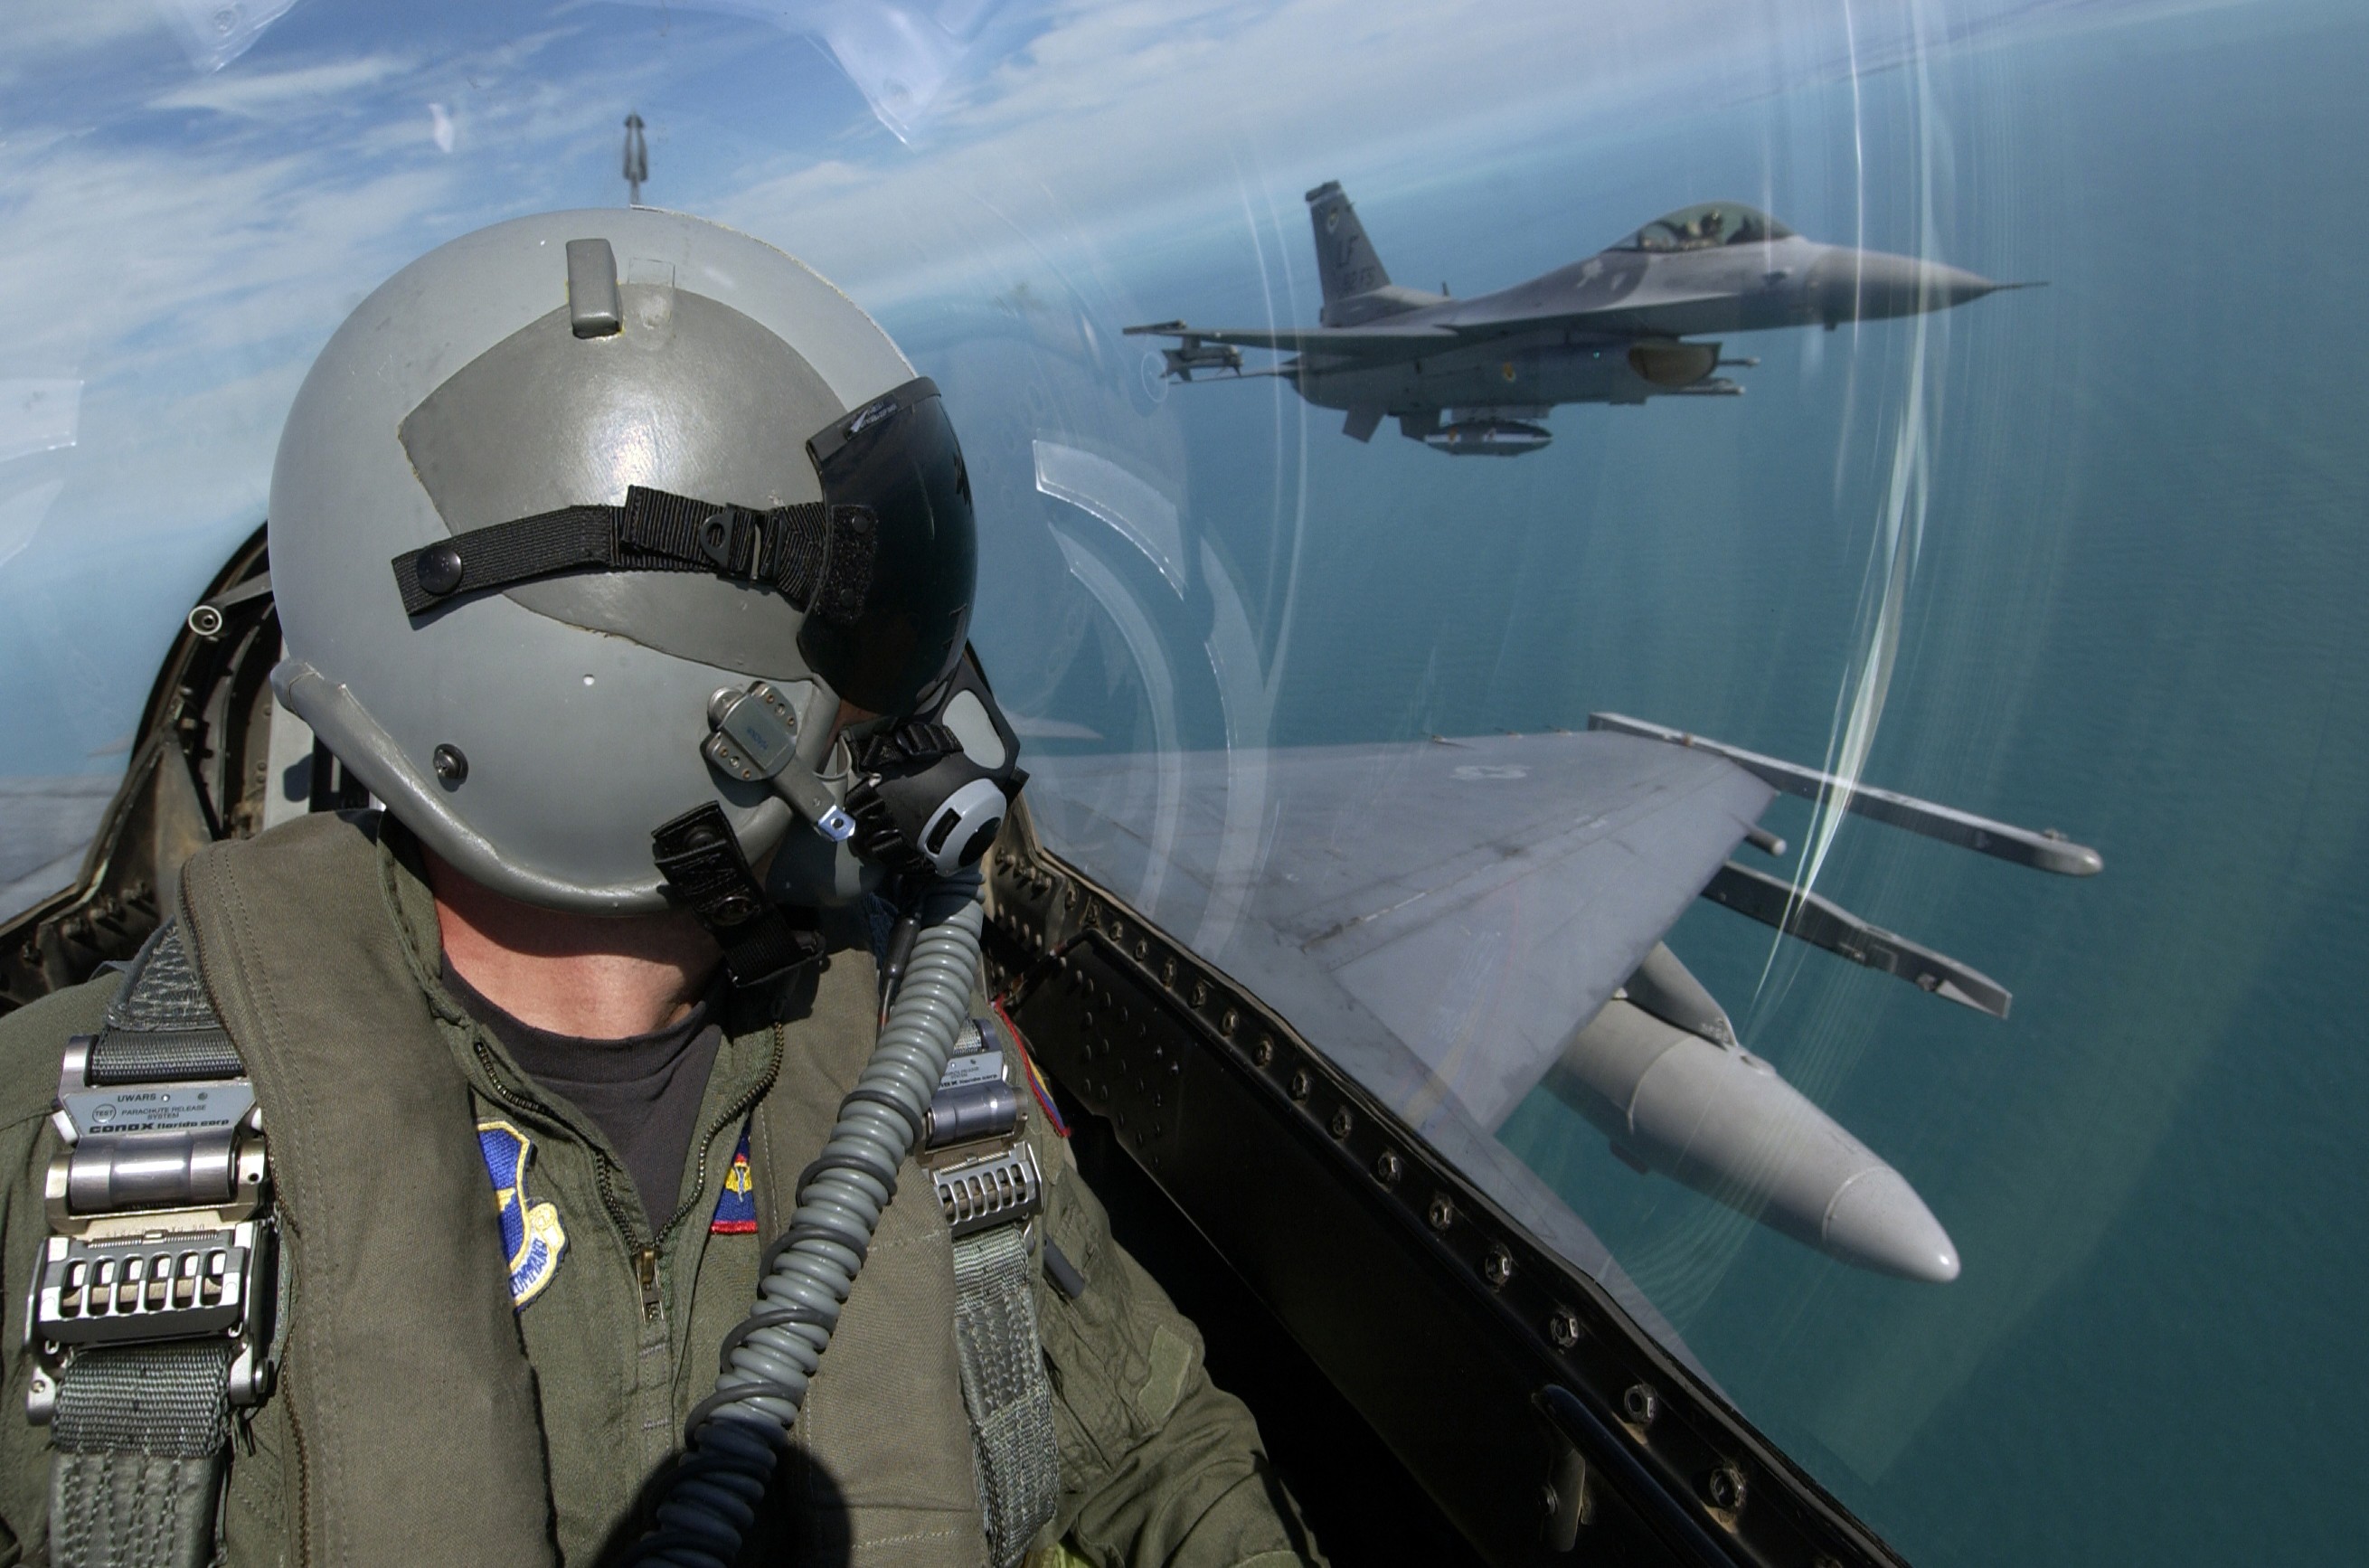 People 2620x1734 aircraft military jet fighter General Dynamics F-16 Fighting Falcon cockpit military aircraft pilot flight helmet flight suits fighter pilot outfit